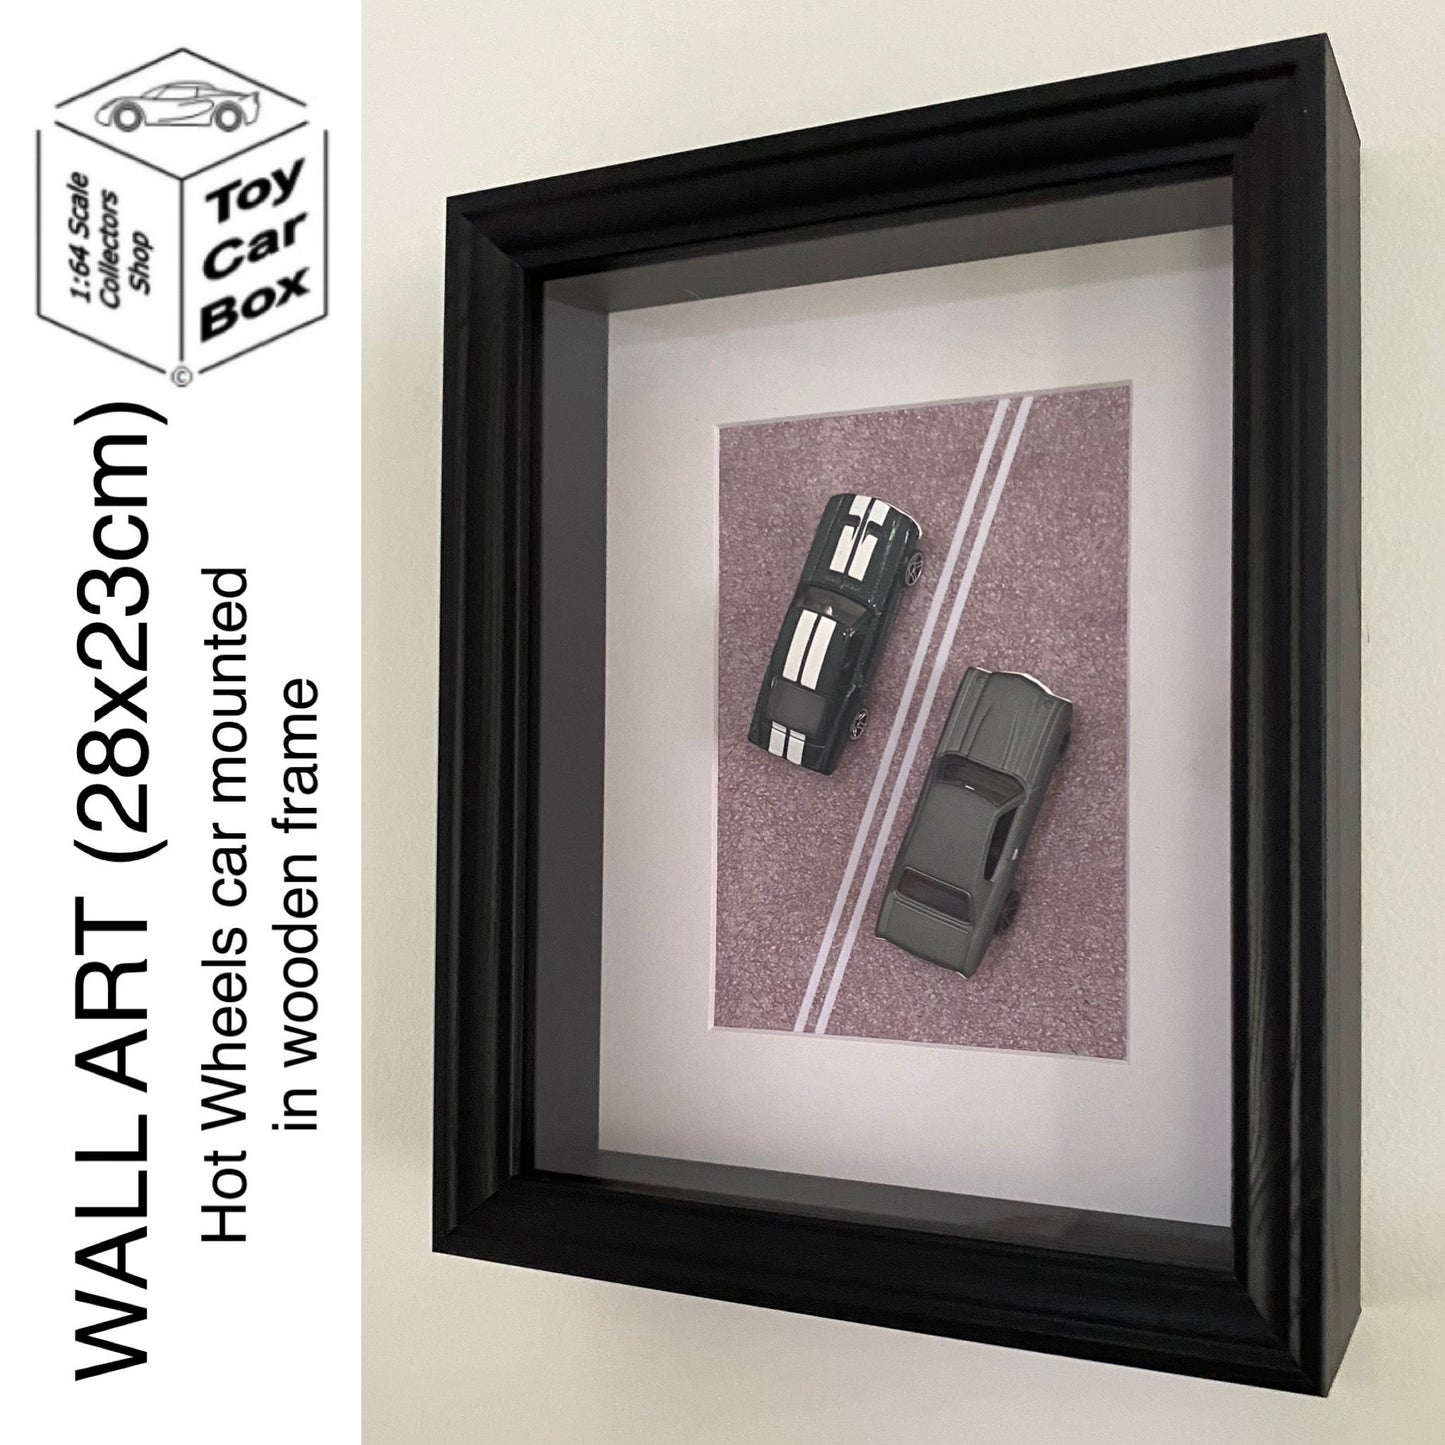 WALL ART - HOT WHEELS ‘67 Mustang & ‘70 Chevelle Mounted In Frame (28x23 cm) N00